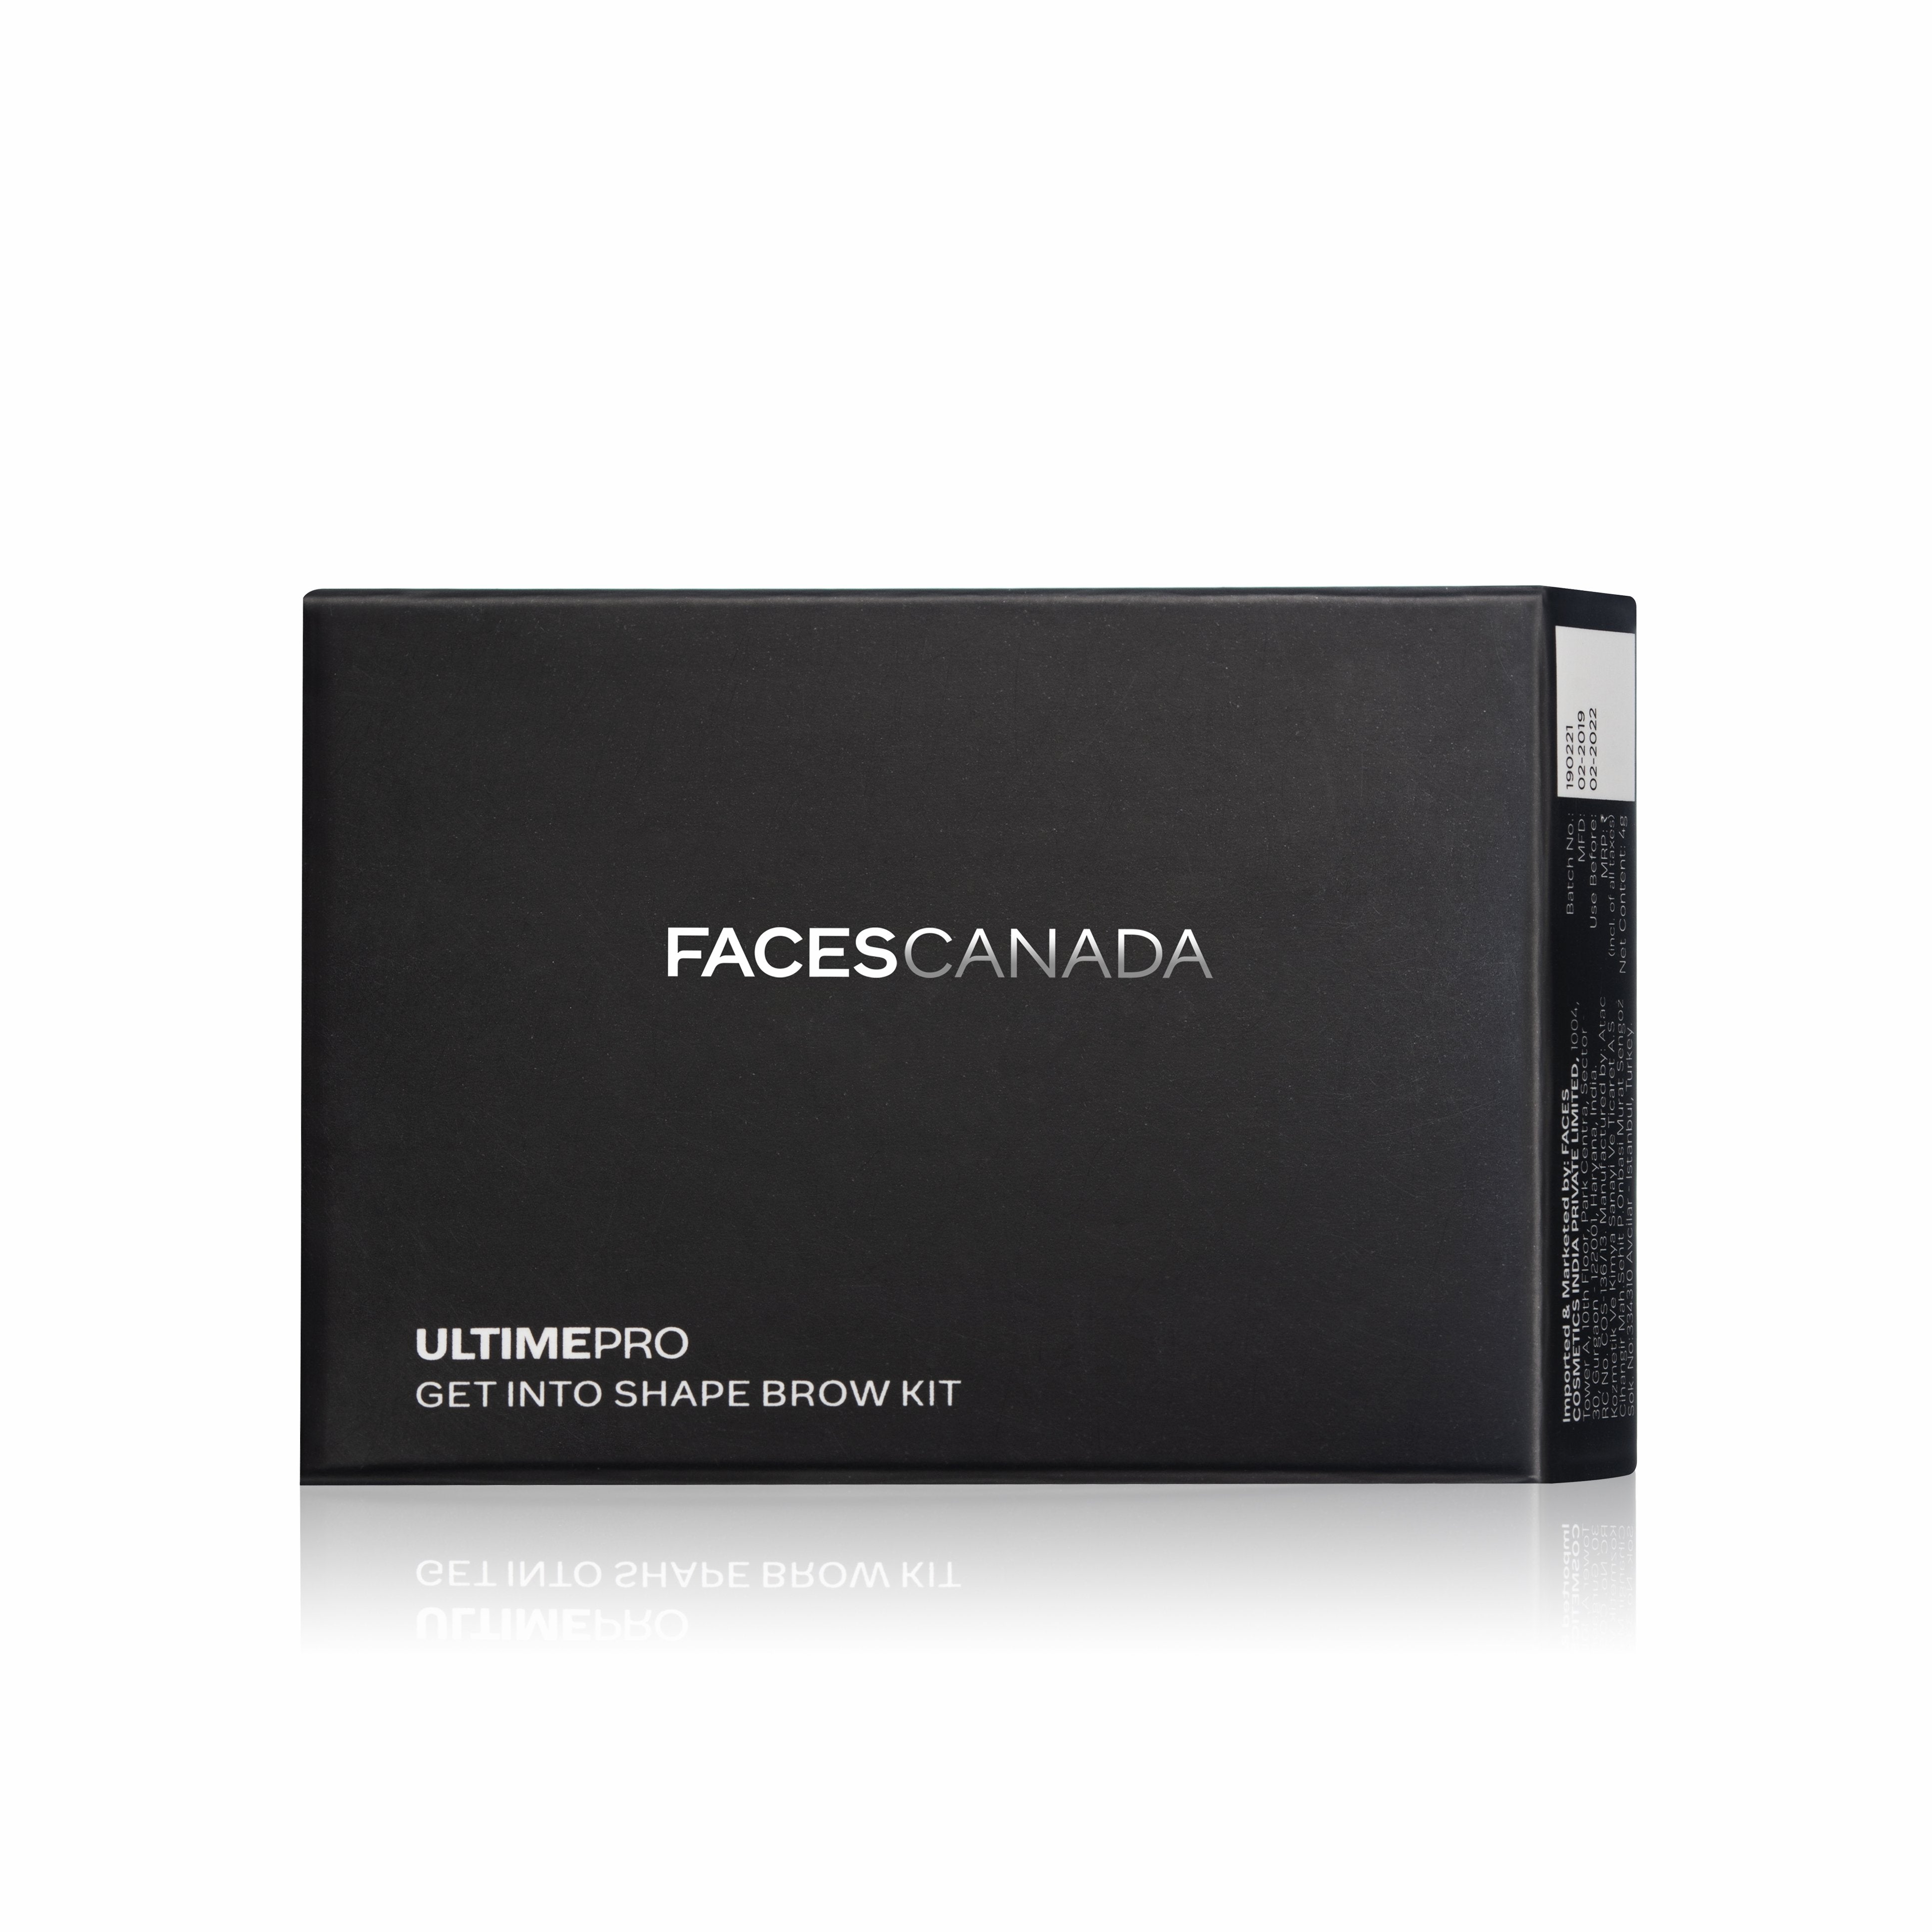 Faces Canada Ultime Pro Brow Shaping Kit Faces Canada